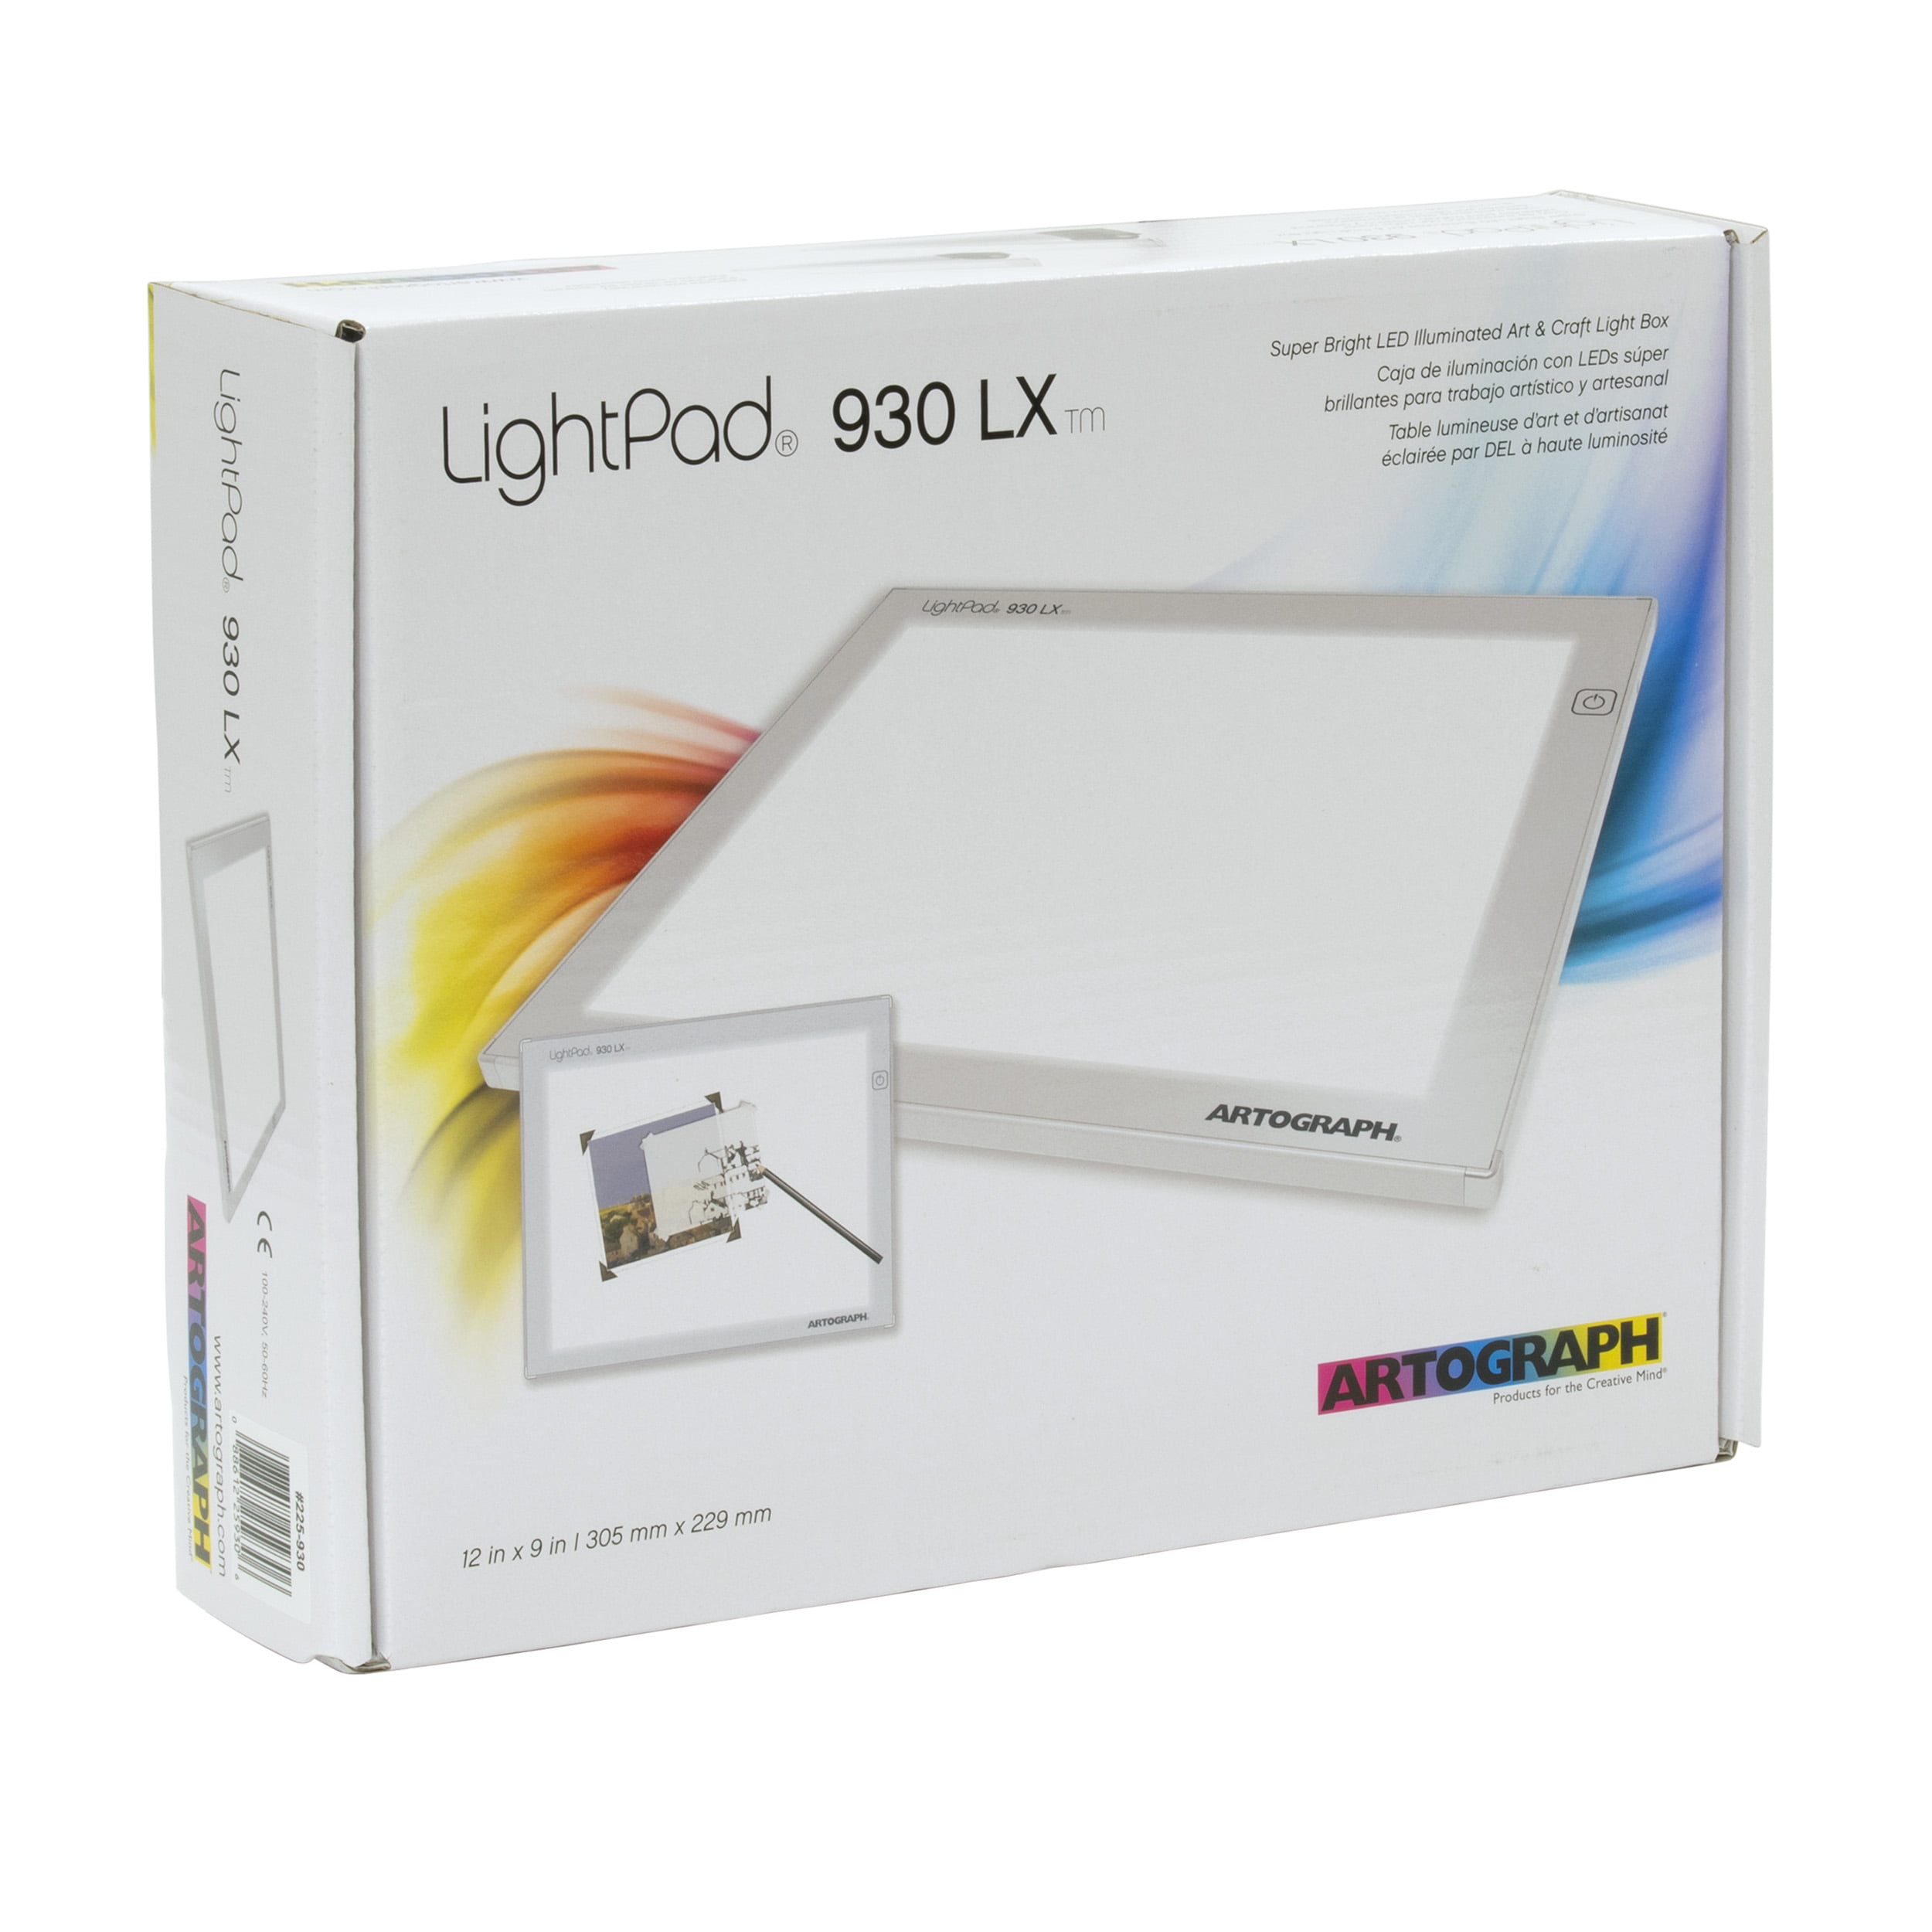 Introducing the LightPad PRO1200 and PRO1700 Light Boxes by Artograph 